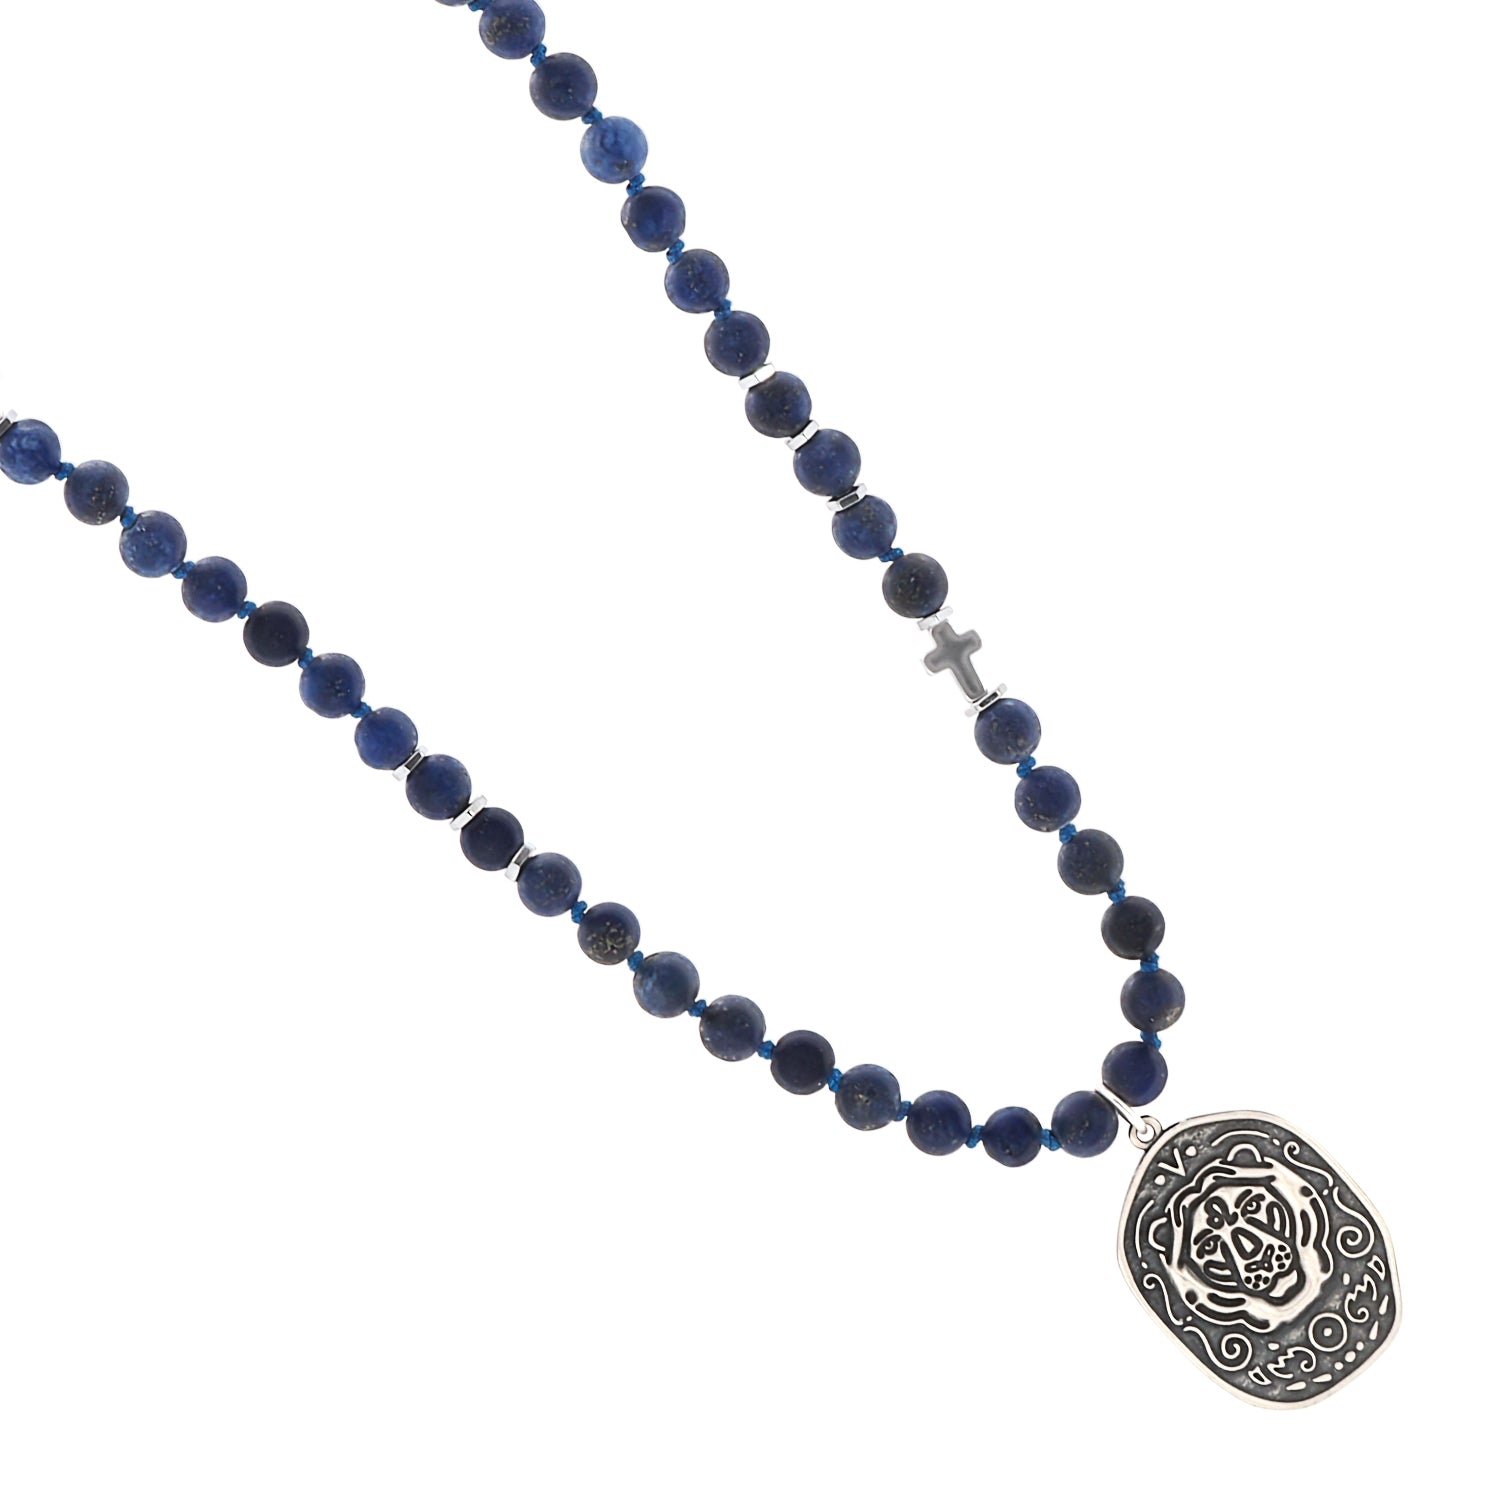 Elevate your style with the Spiritual Lapis Lazuli Lion necklace, a meaningful piece that represents courage and protection.